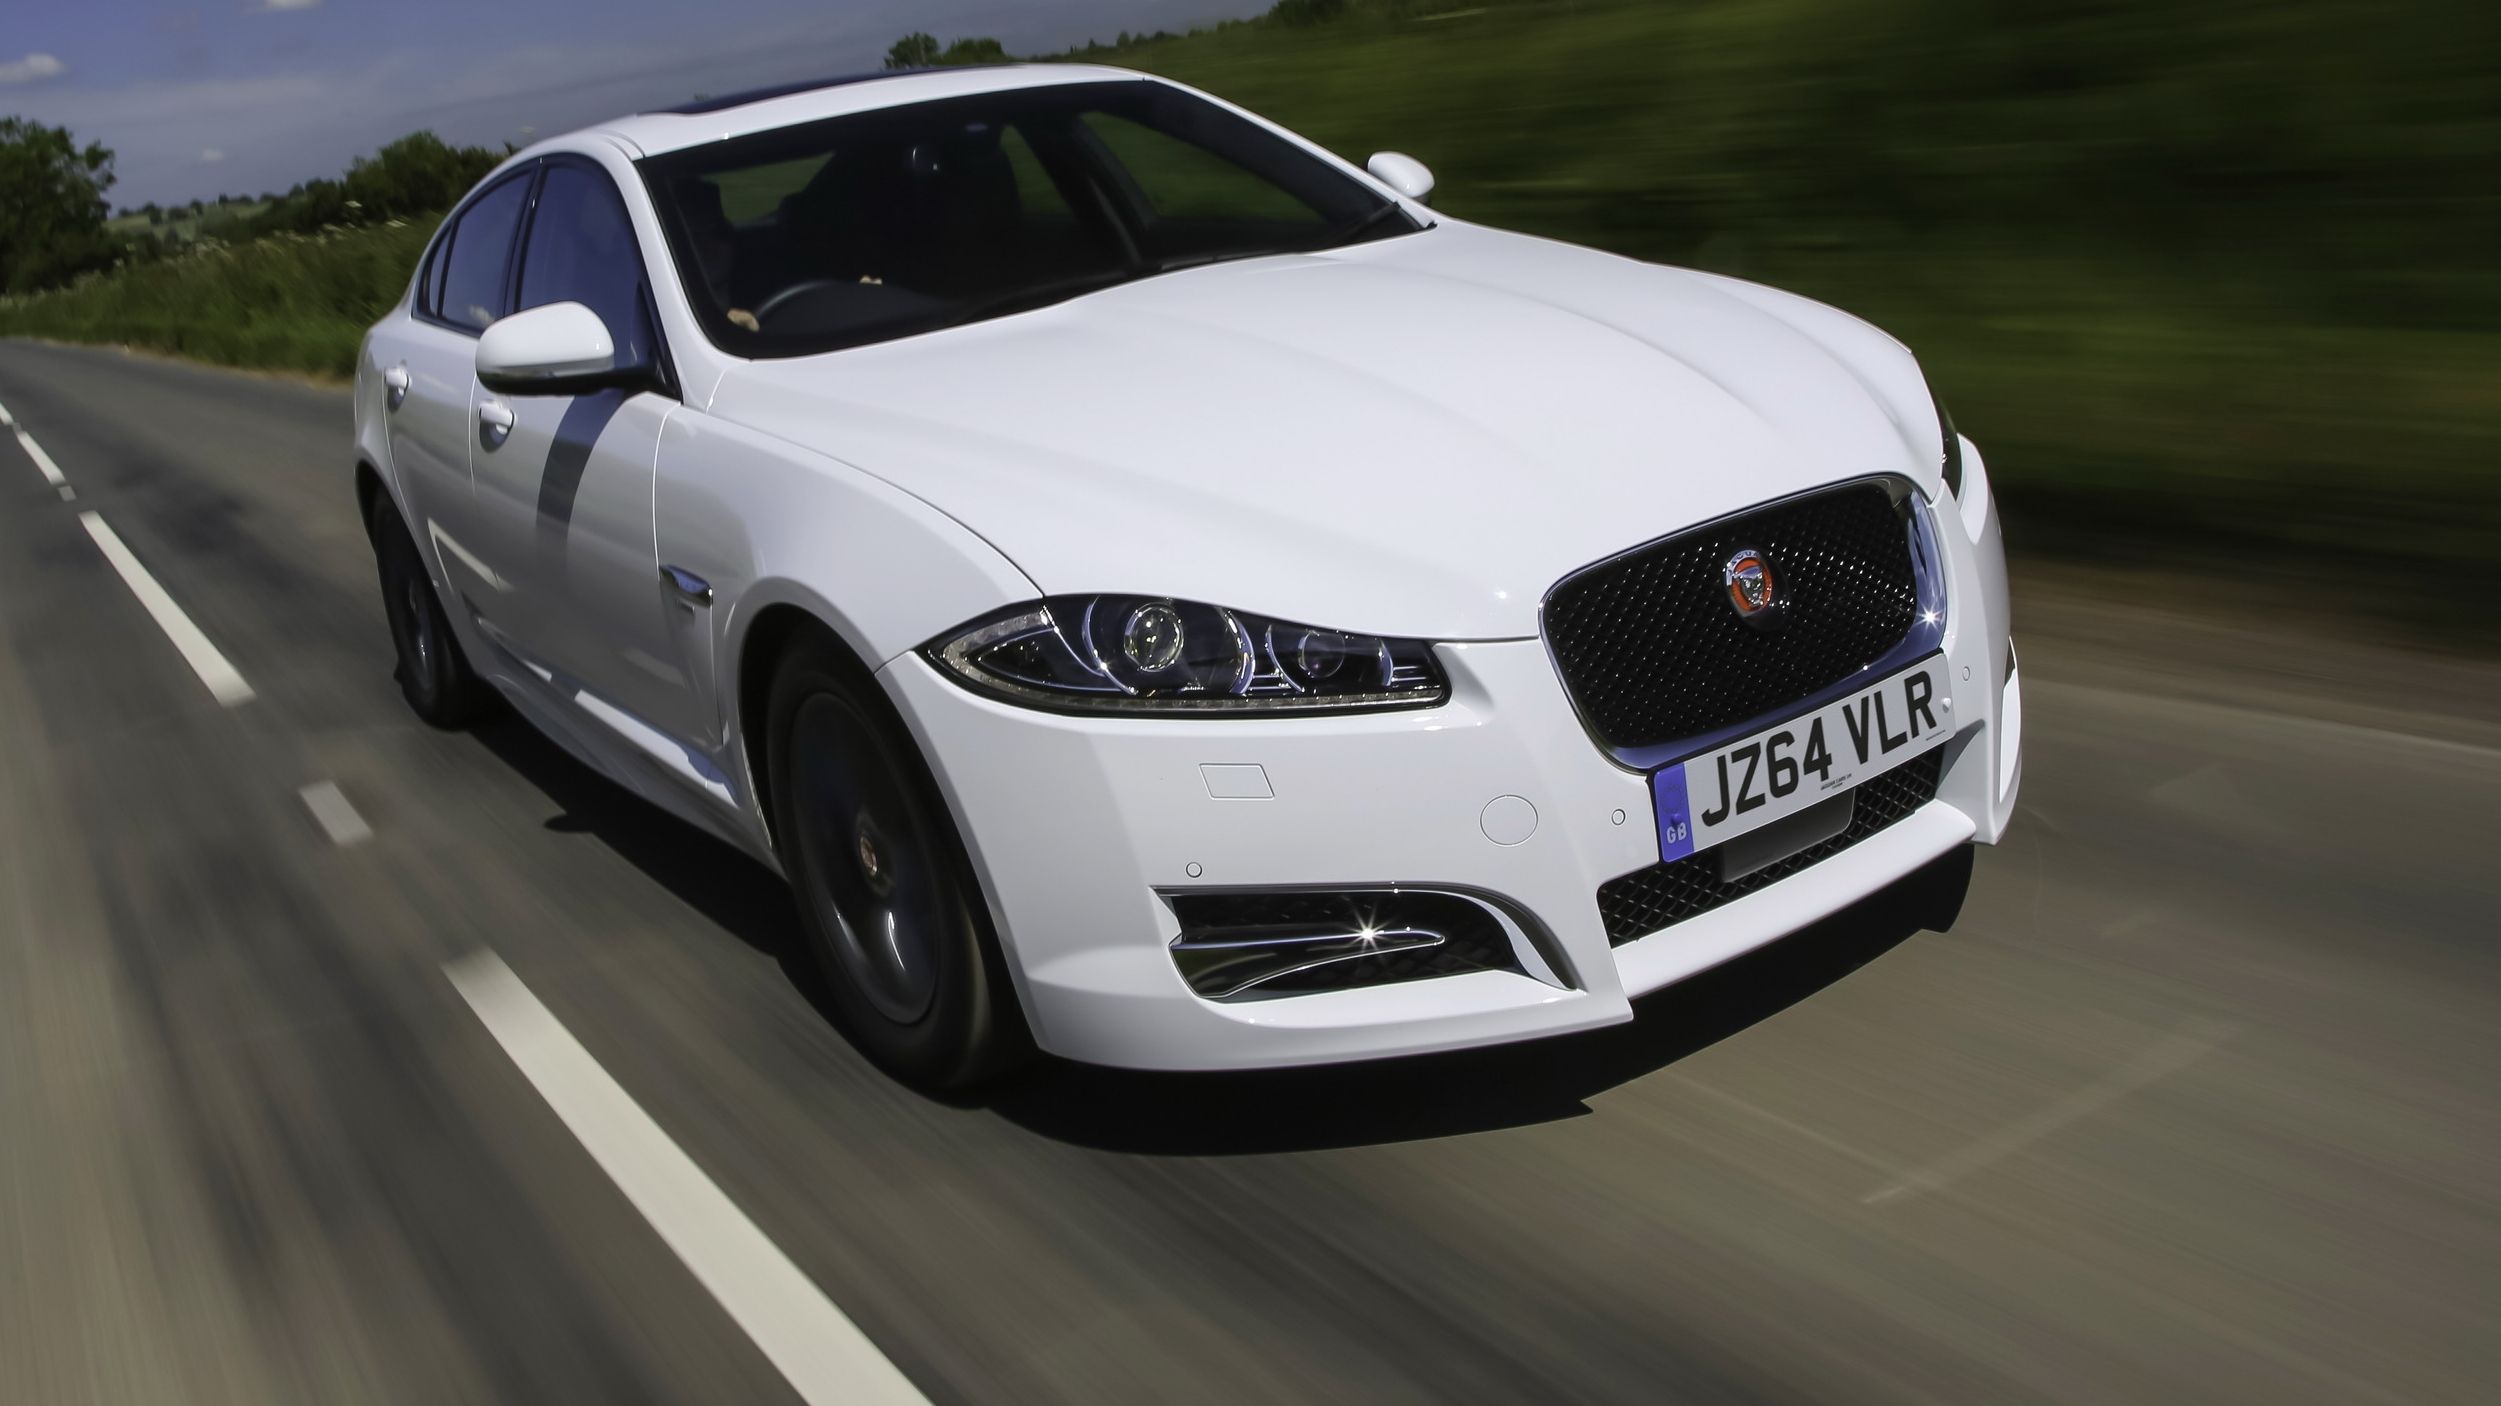  Just because it has a cool name and a few upgrades doesn't automatically make the Jaguar XF R-Sport Black a great buy. Check out why we think it may be best to pass on this one at TopSpeed.com.